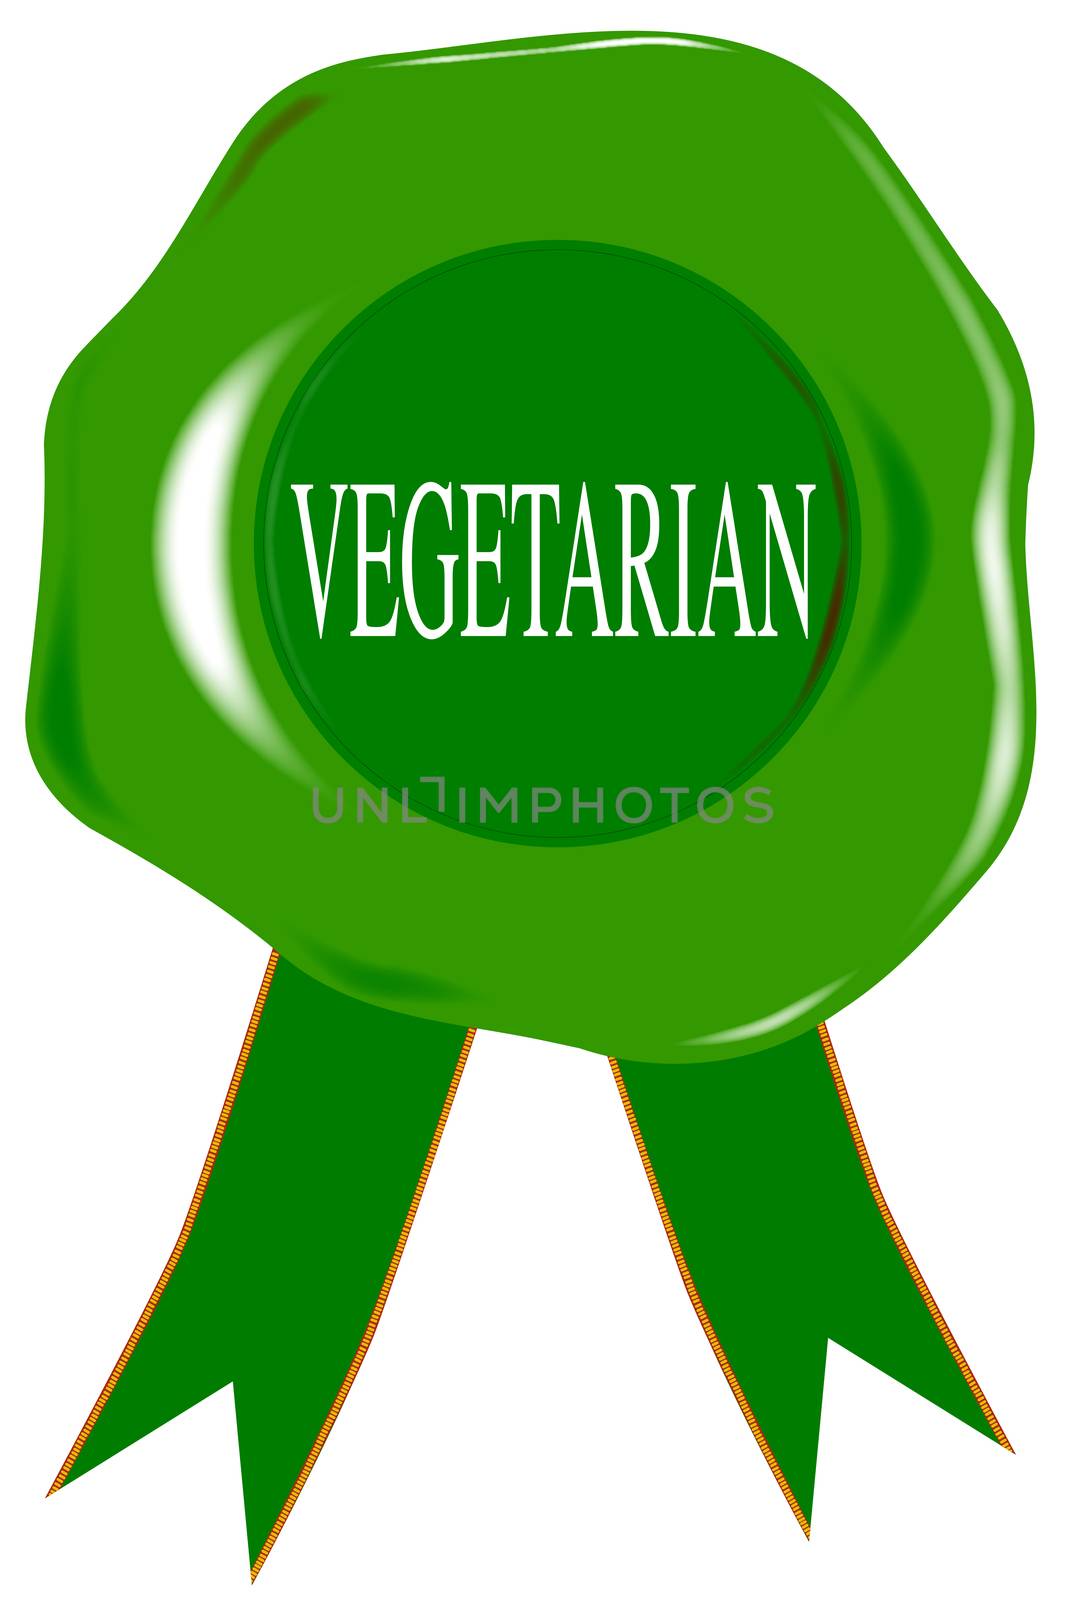 A green wax stamp with vegetarian as text over white